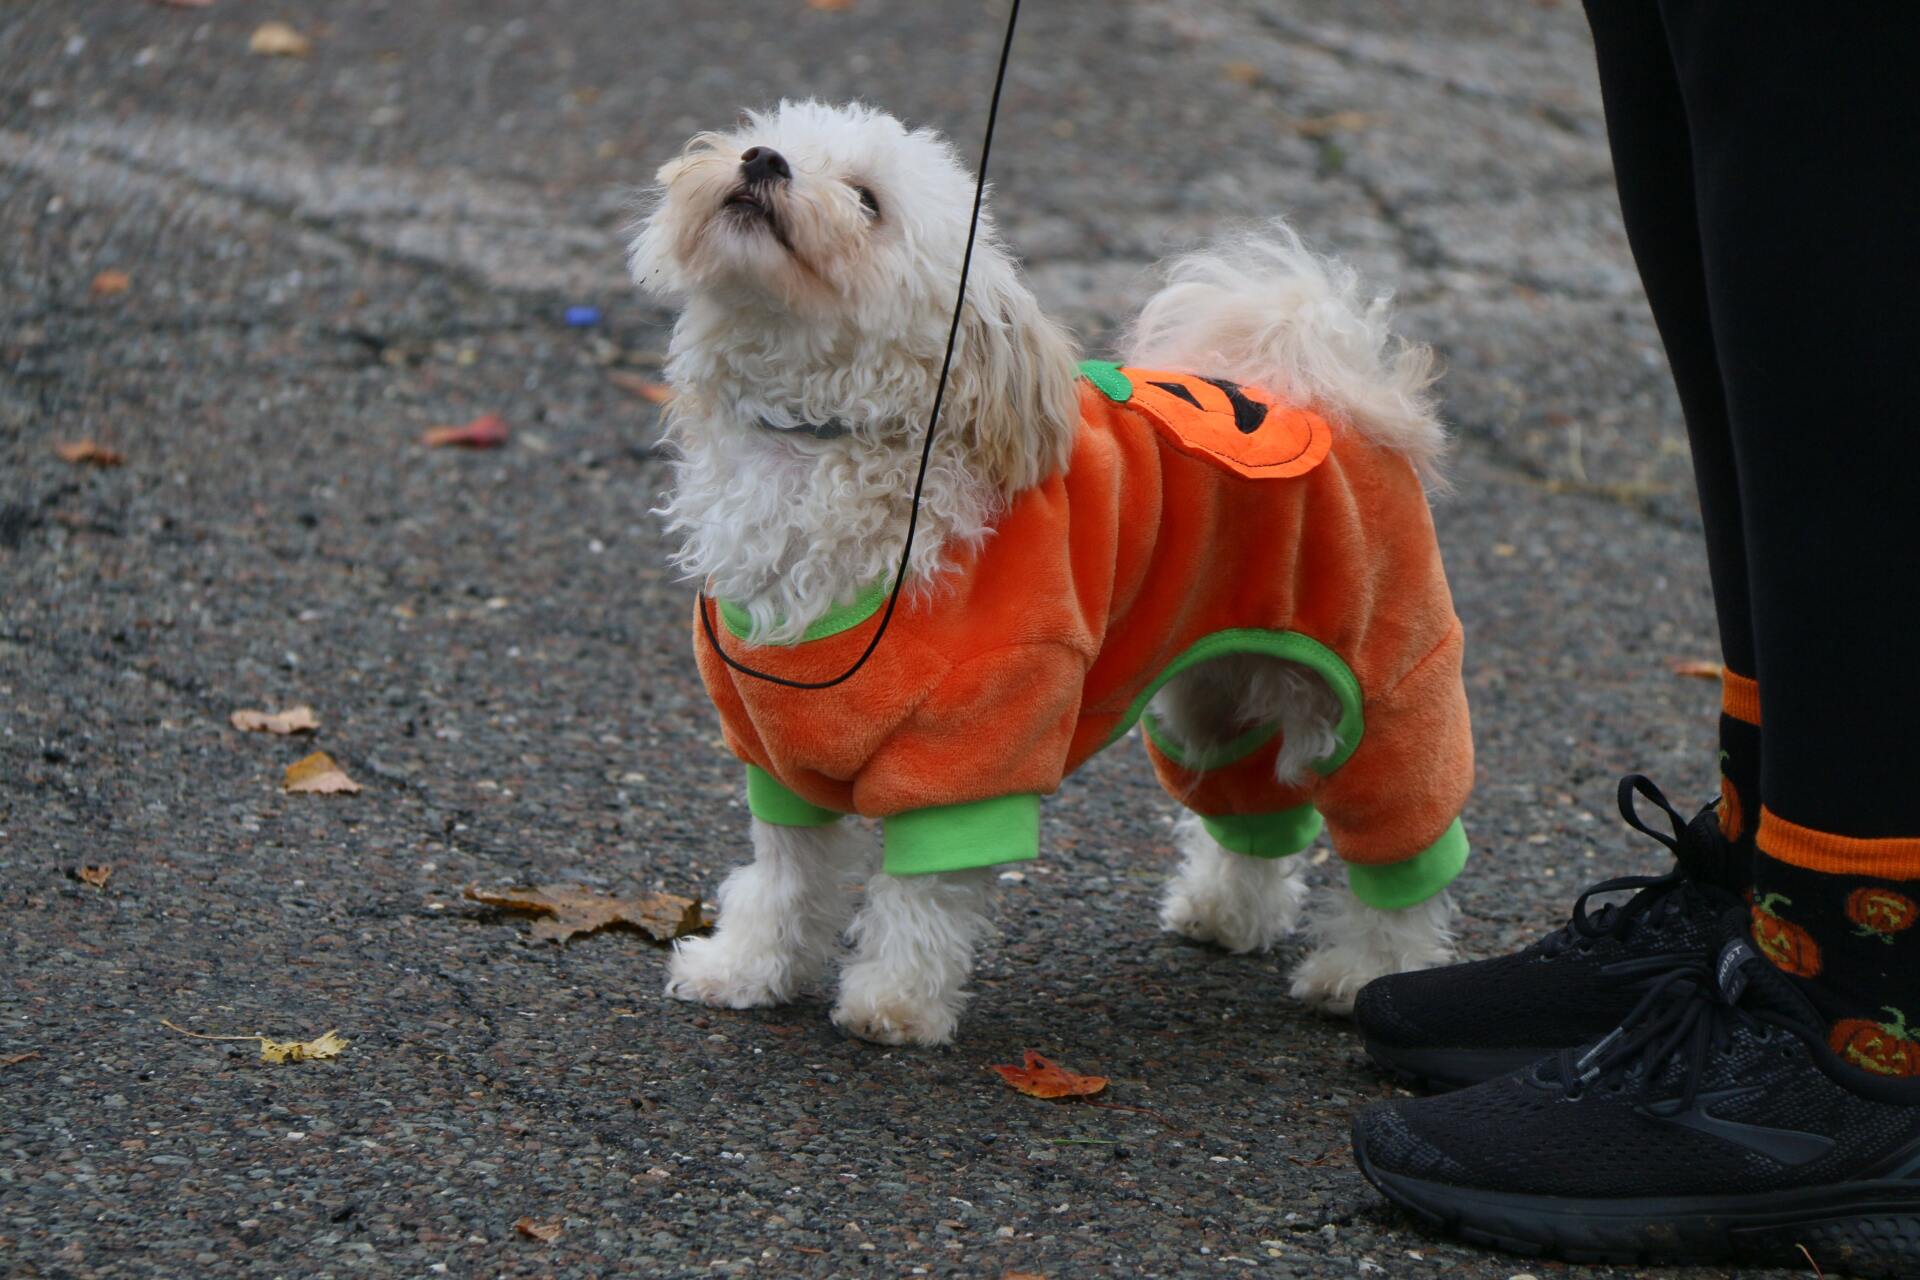 A small white dog is wearing an orange and green pumpkin costume.